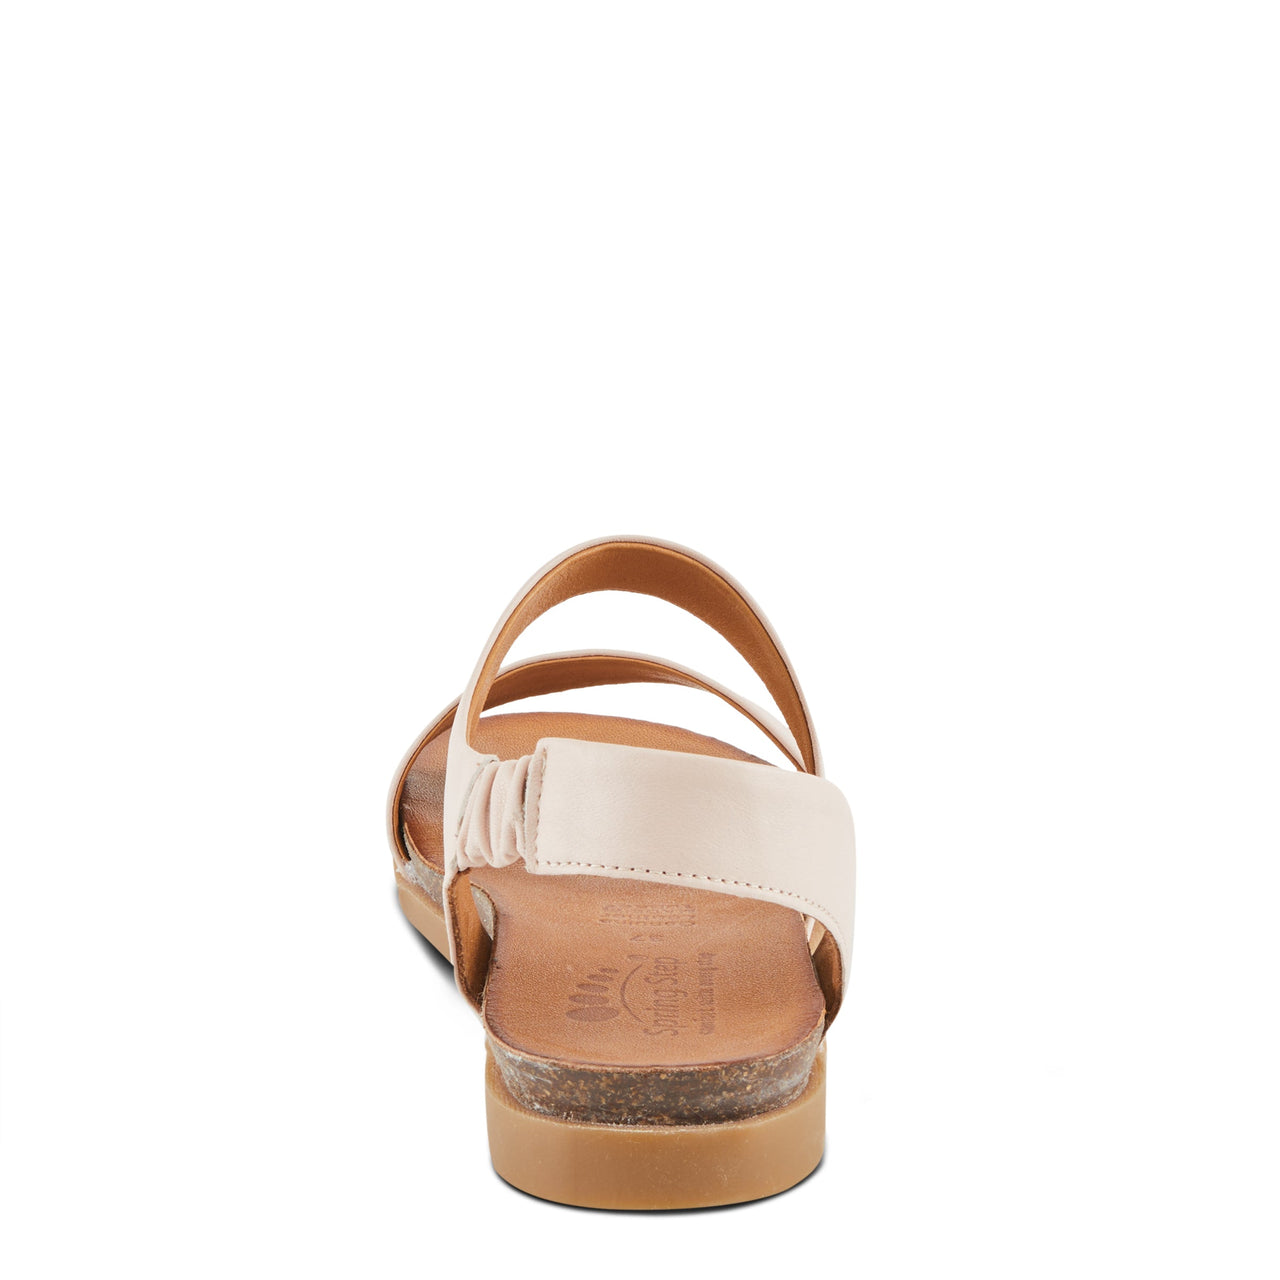 Brown leather Spring Step Besitos sandals with floral embellishments and cushioned footbed for all-day comfort and style